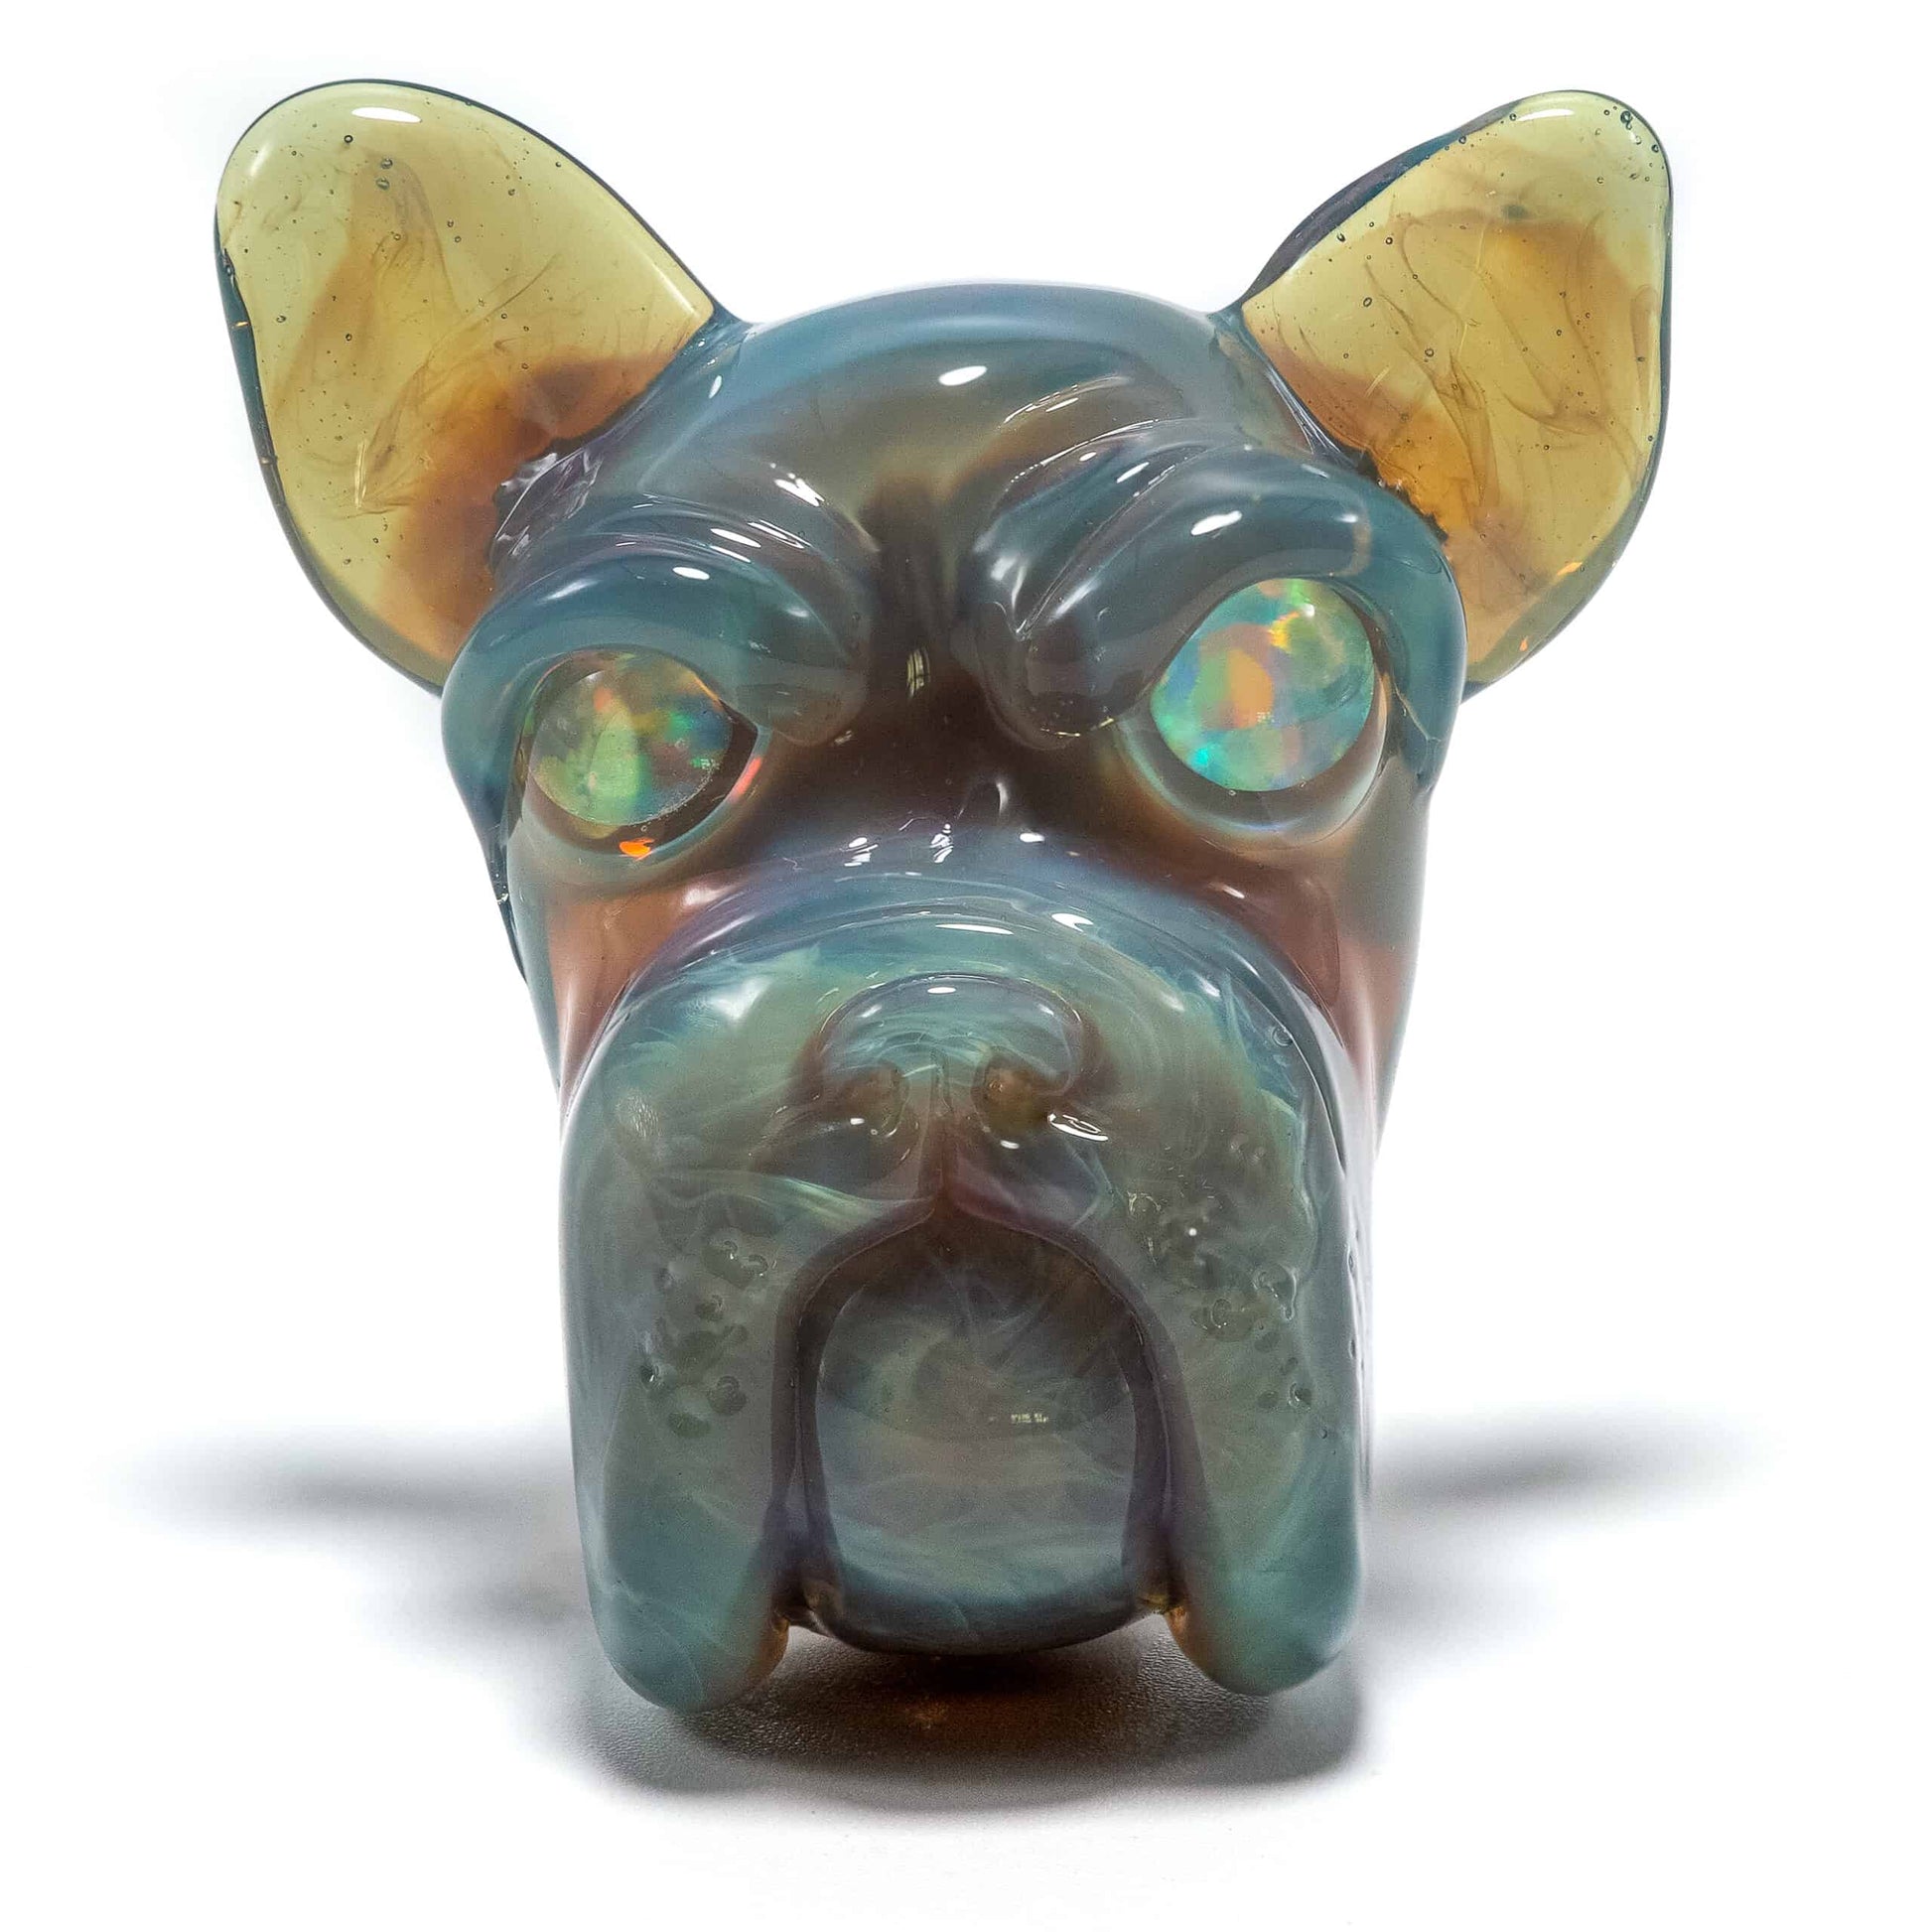 luxurious design of the [SW2]  Mirage CFL Full-size Frenchie Rig with Opal Eyes Set by Swanny (w/ matching Opal Eyes Frenchie Pendant, Frenchie Spinner Cap, Bobblehead Opal Eyes Pendant, a Swanny Moodmat, and a signed 1300 P